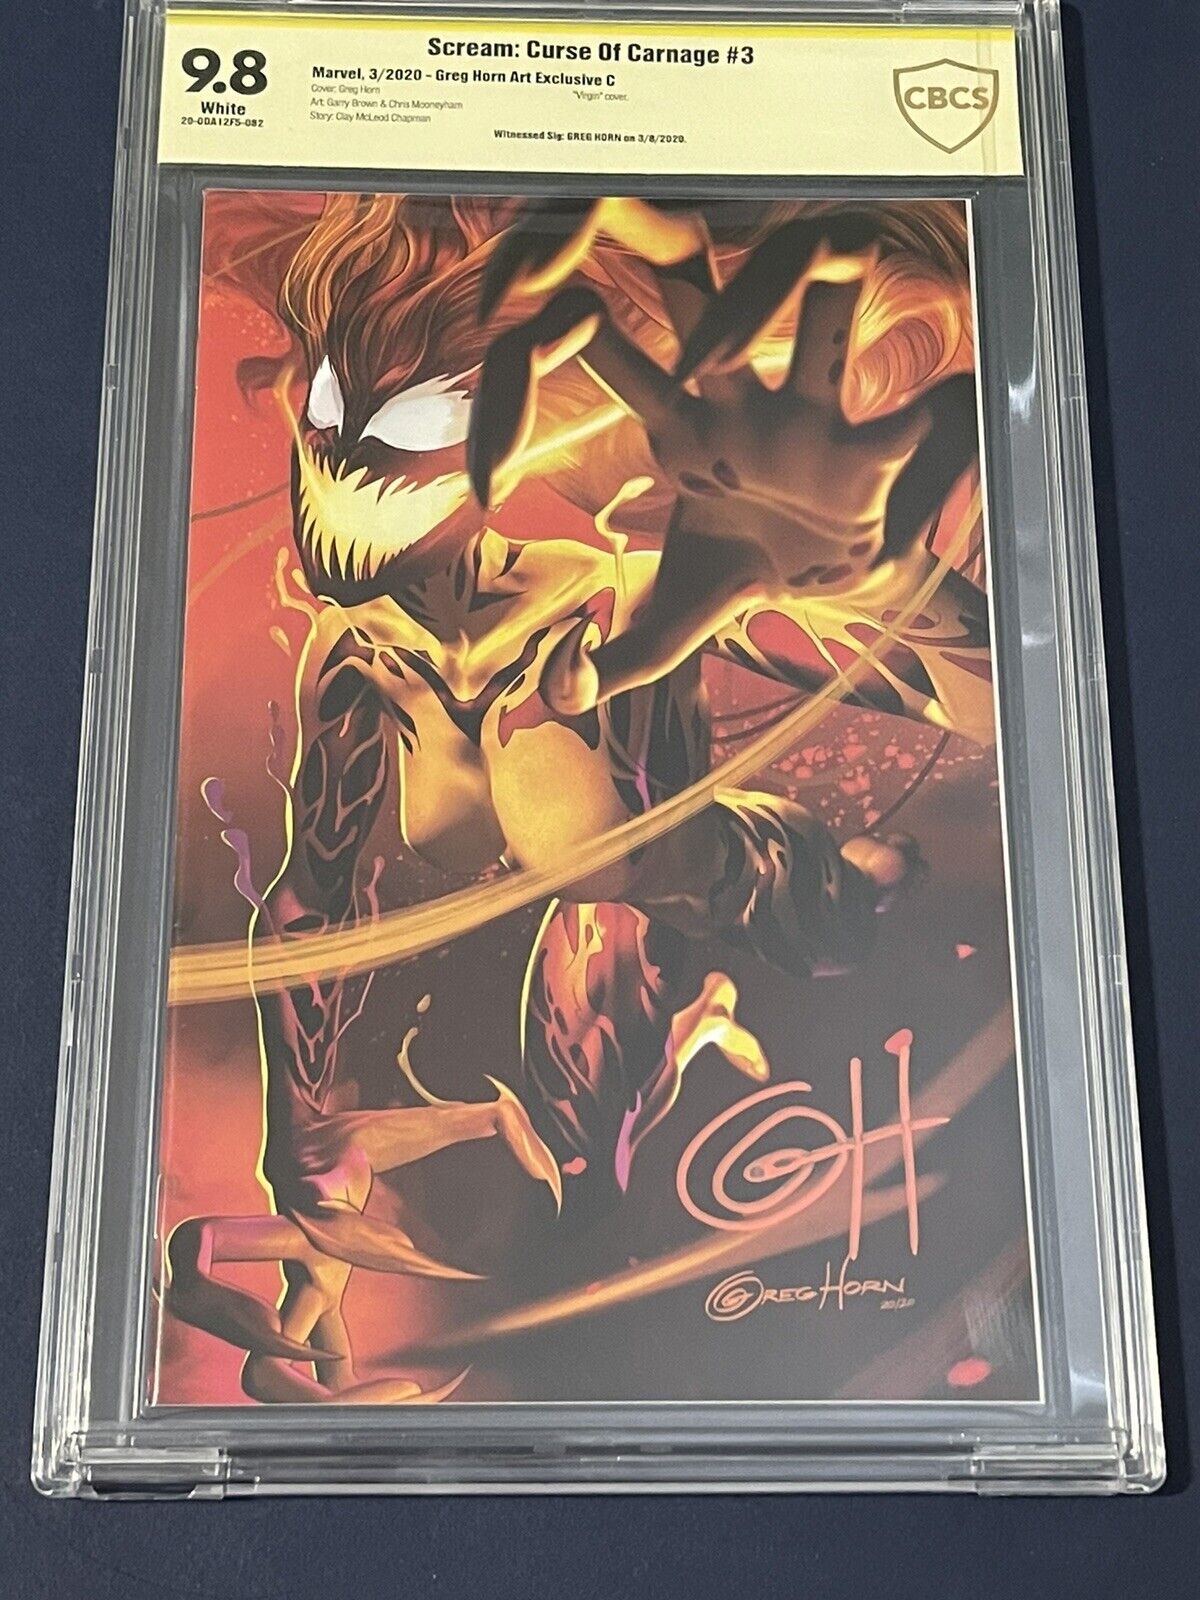 Scream Curse Of Carnage #3 Variant C CBCS 9.8 Signed By Greg Horn